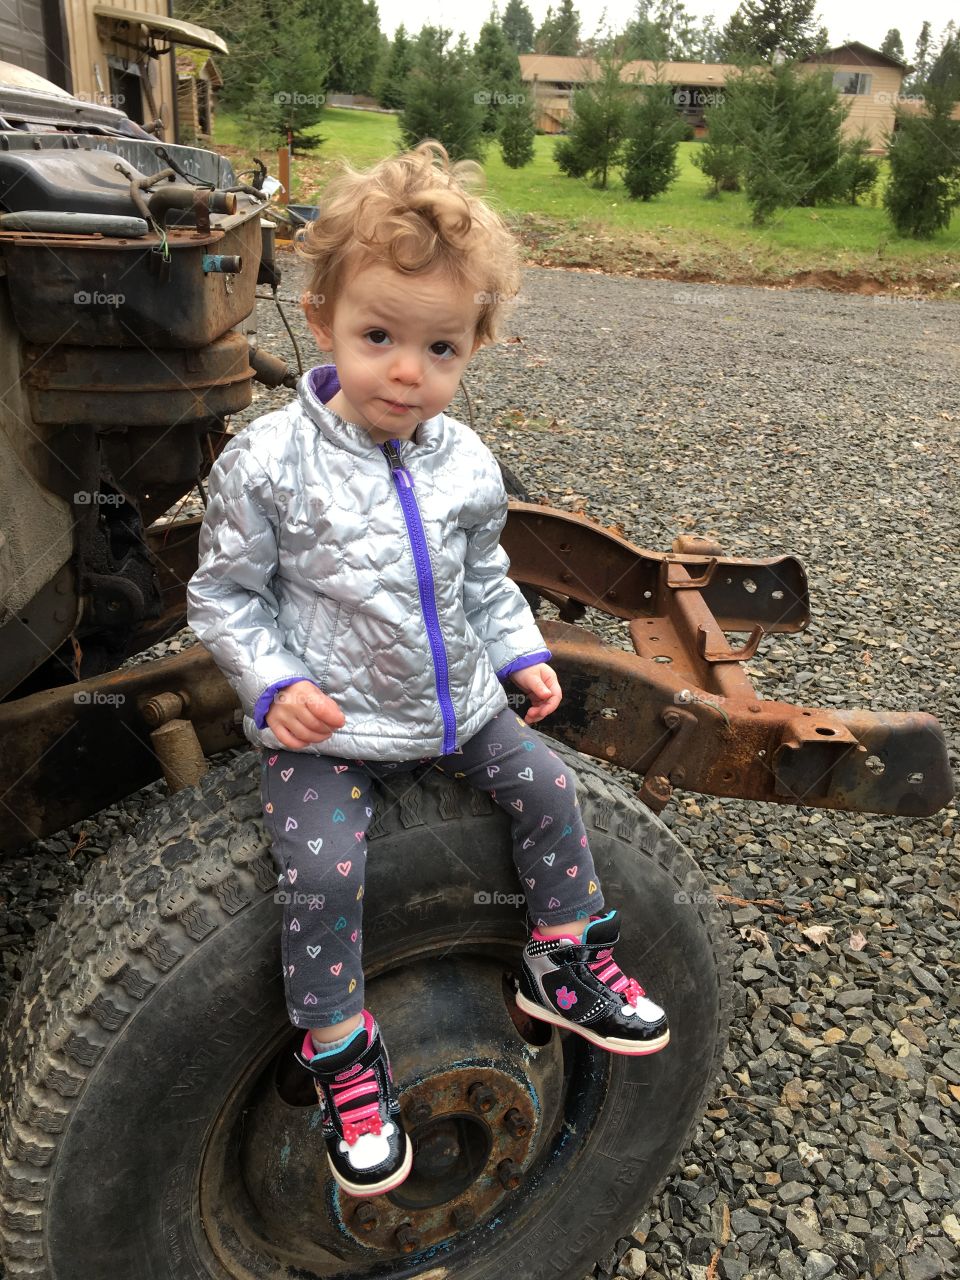 Sitting on the tire of grandpa’s project truck 